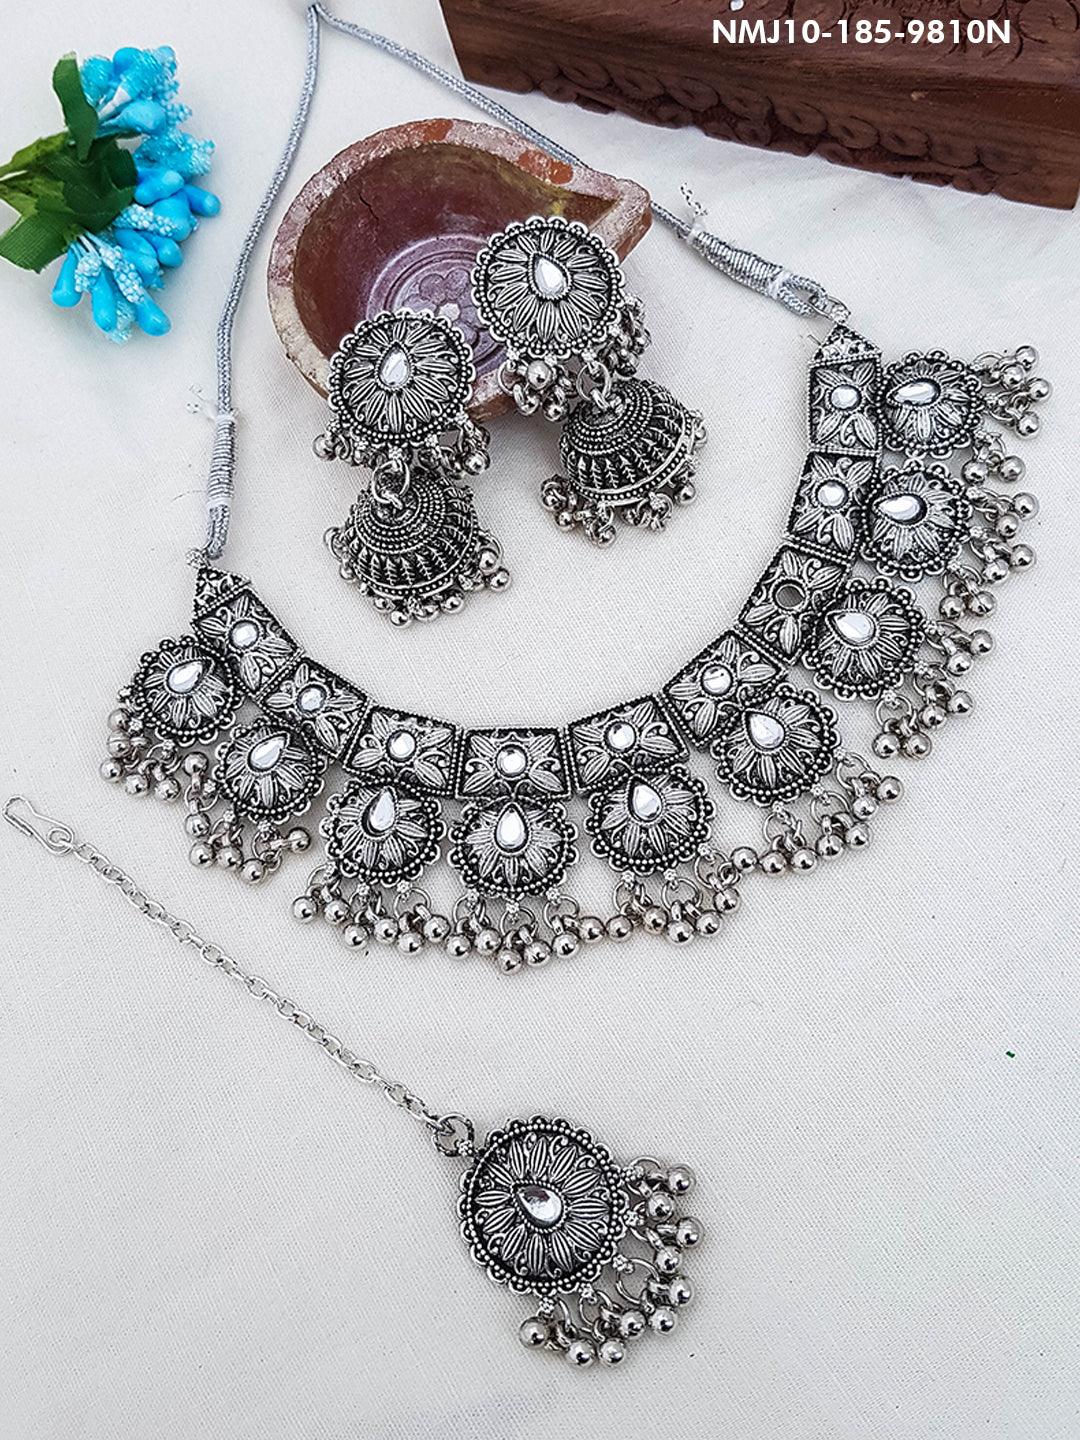 Silver Oxidised Exclusive Designer Necklace Set for special occasion 9810N - Griiham